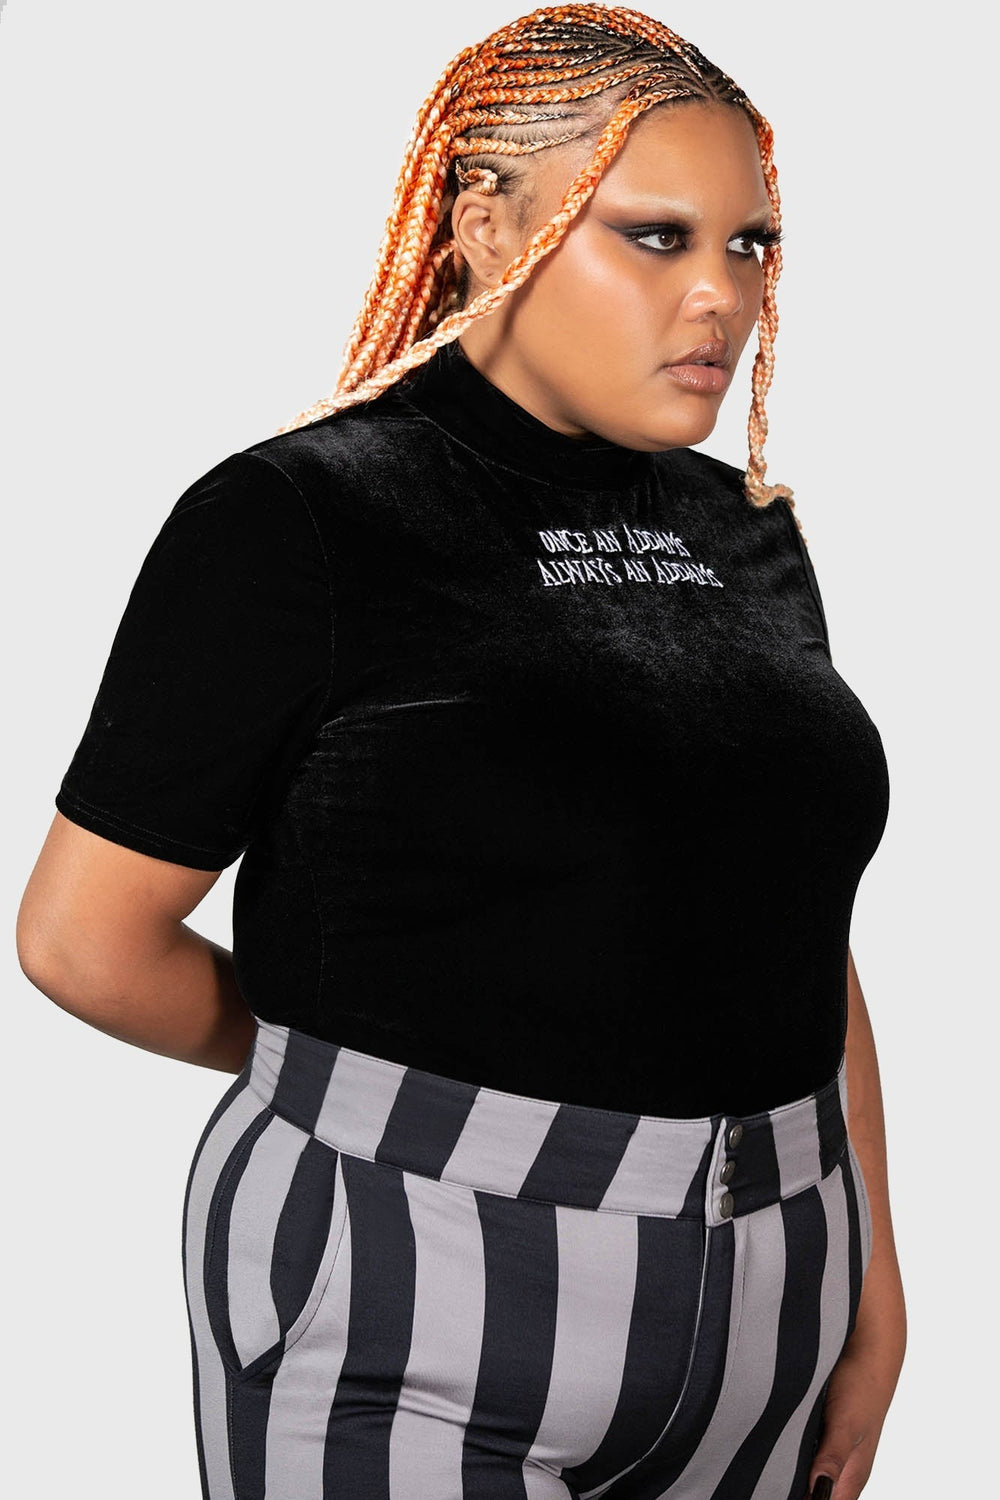 plus sized womens gothic top